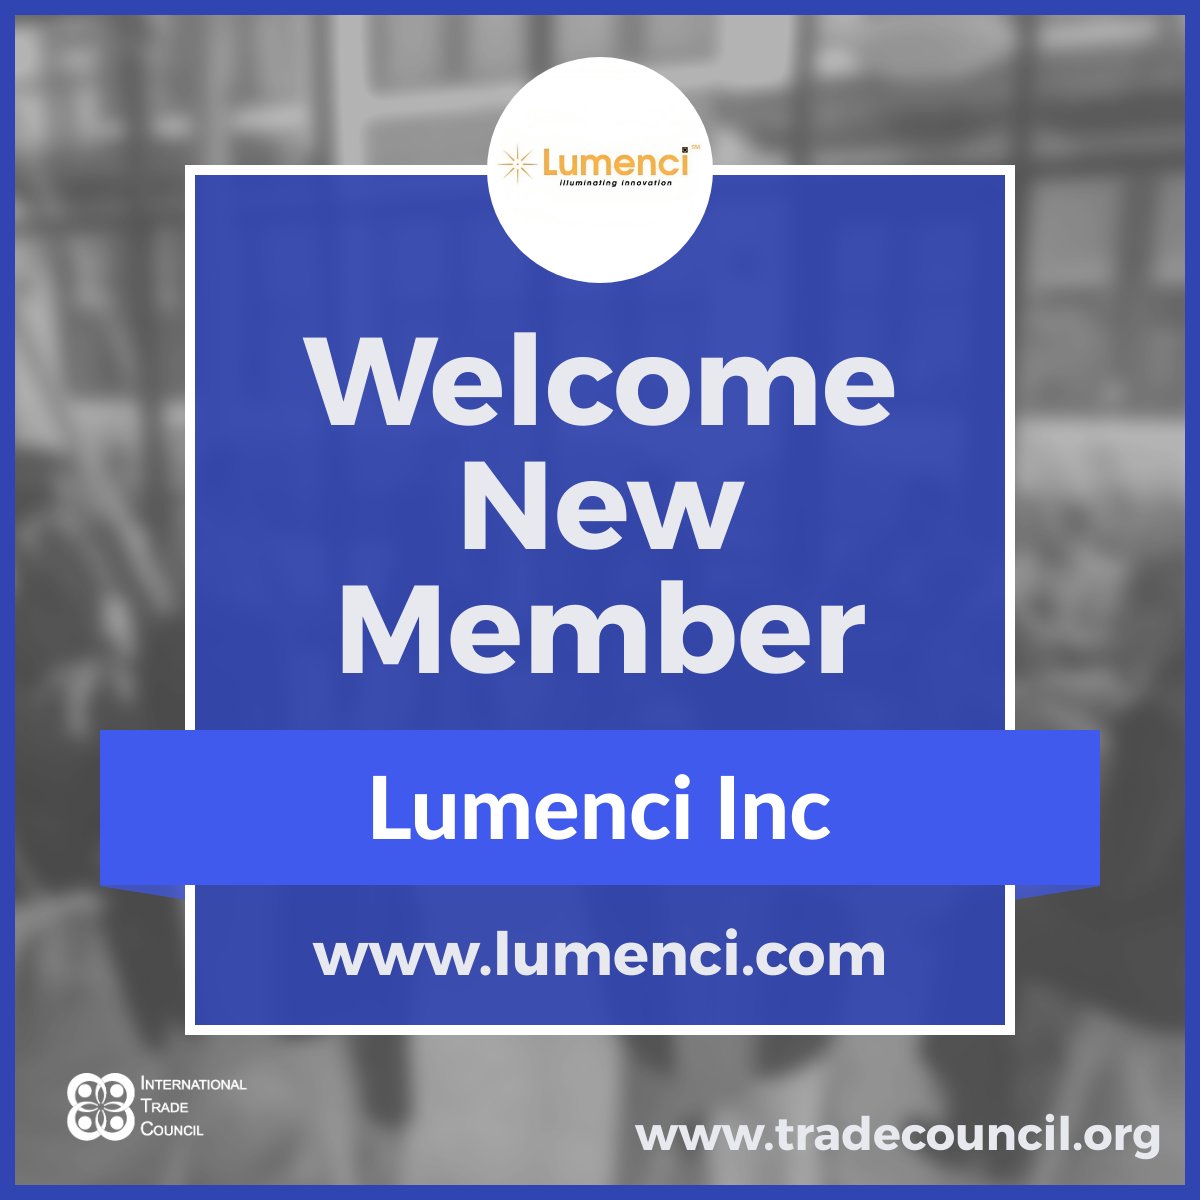 Welcome, Harish Daiya, Co-Founder & CEO at @lumenci_inc to the International Trade Council.

@lumenci_inc excels in innovation value creation, helping clients maximize and protect their IP throughout its lifecycle.